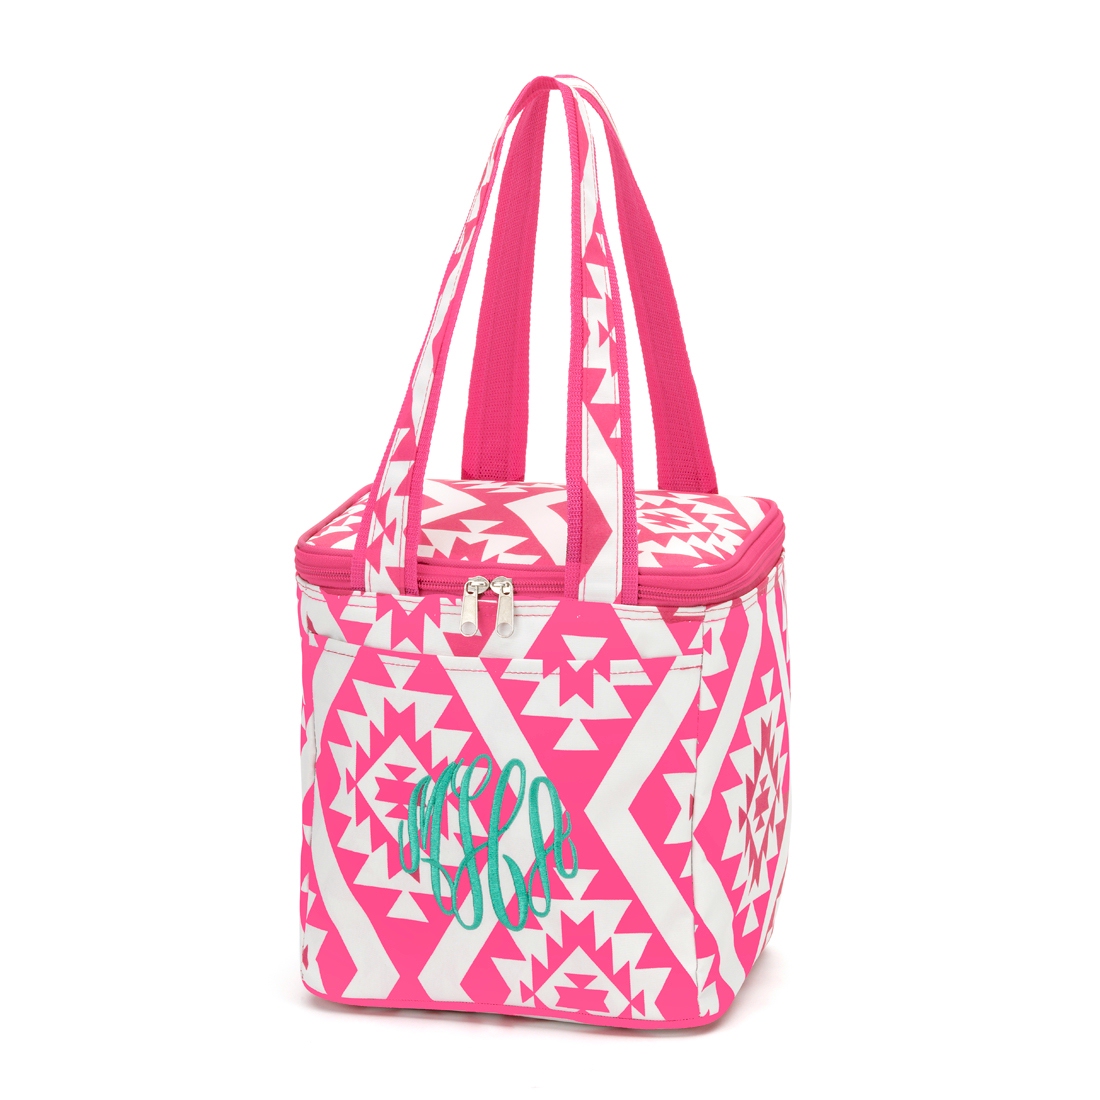 Cooler Tote Embroidery Blanks - PINK AZTEC - CLOSEOUT